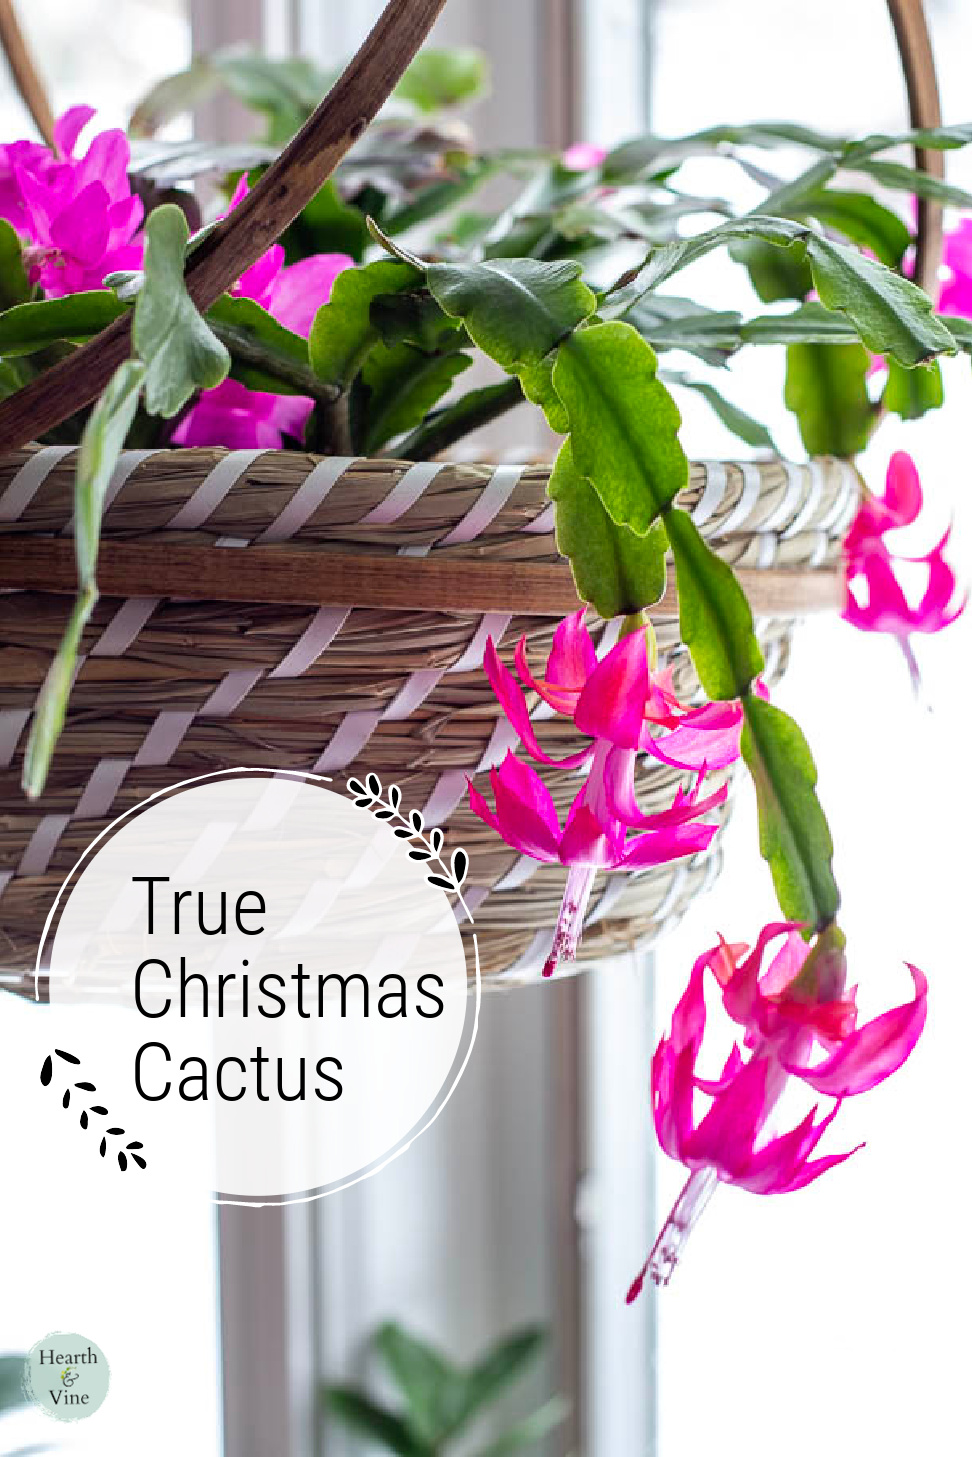 True Christmas cactus hanging from a basket in bloom.